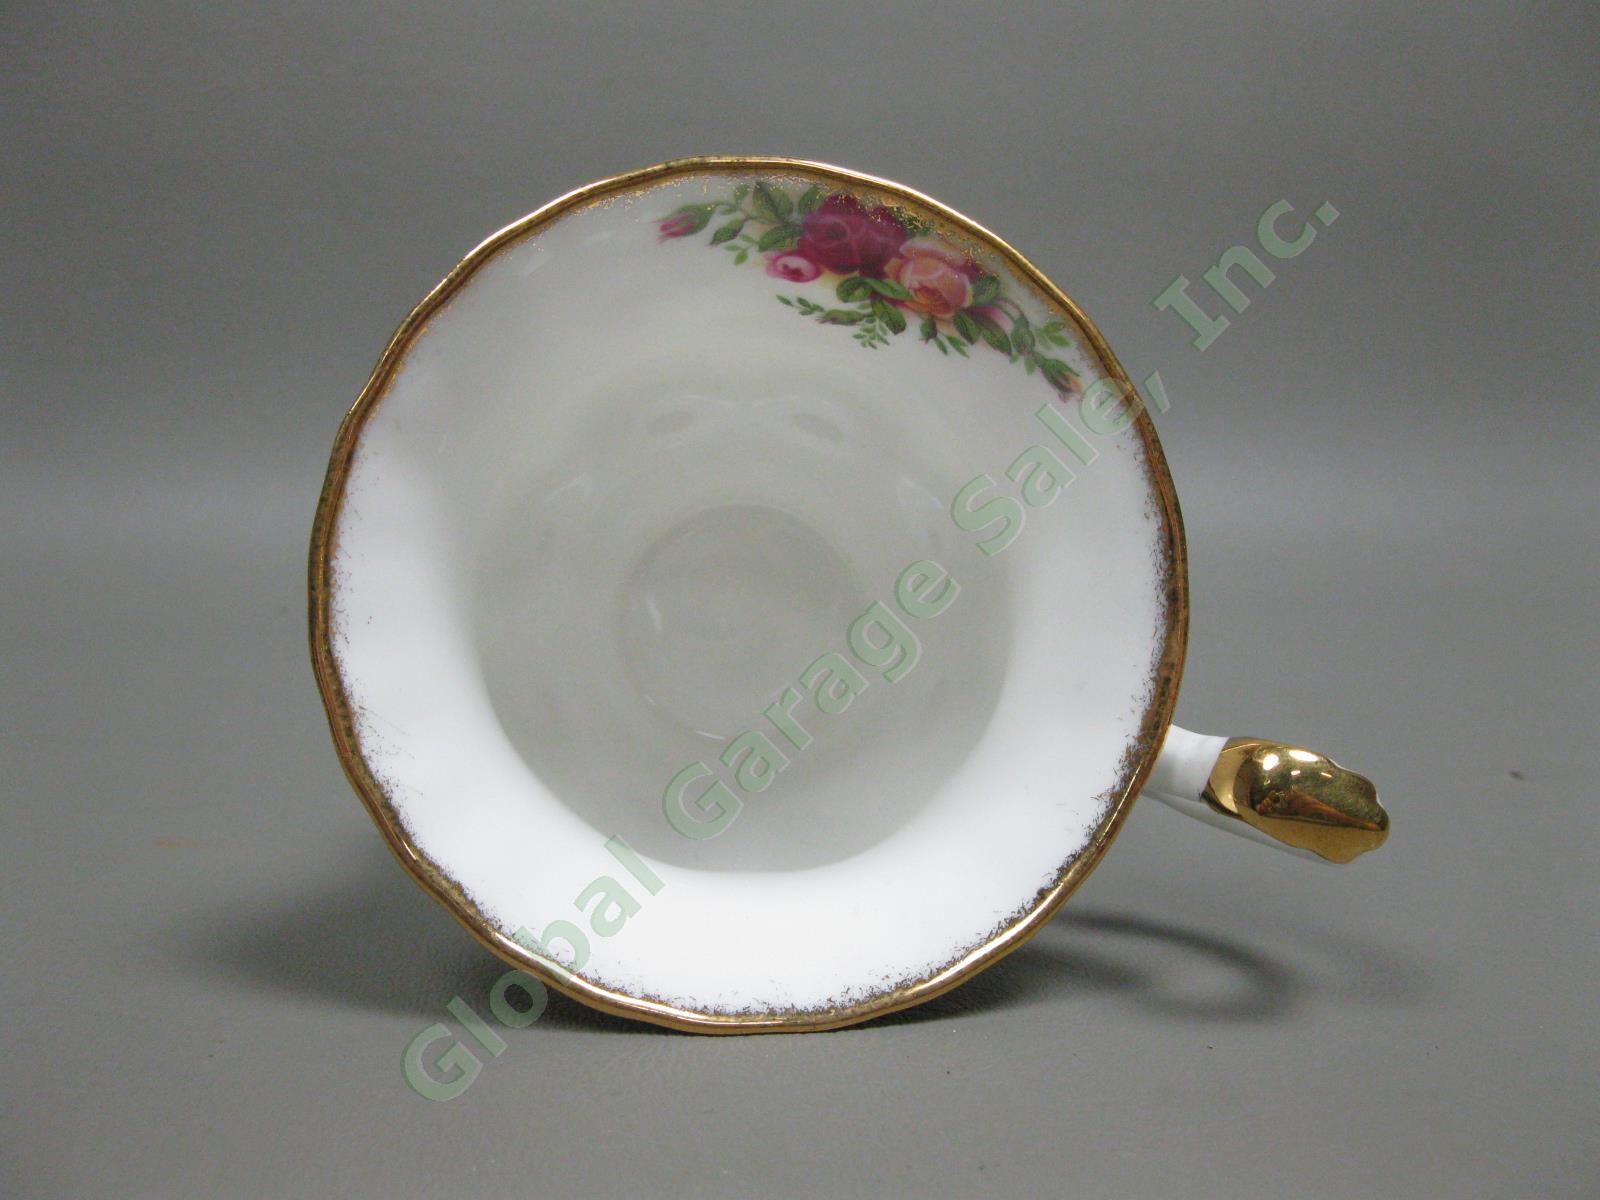 8 Royal Albert Old Country Roses Footed Tea Cup/Saucer Gold Trim Bone China Set 5